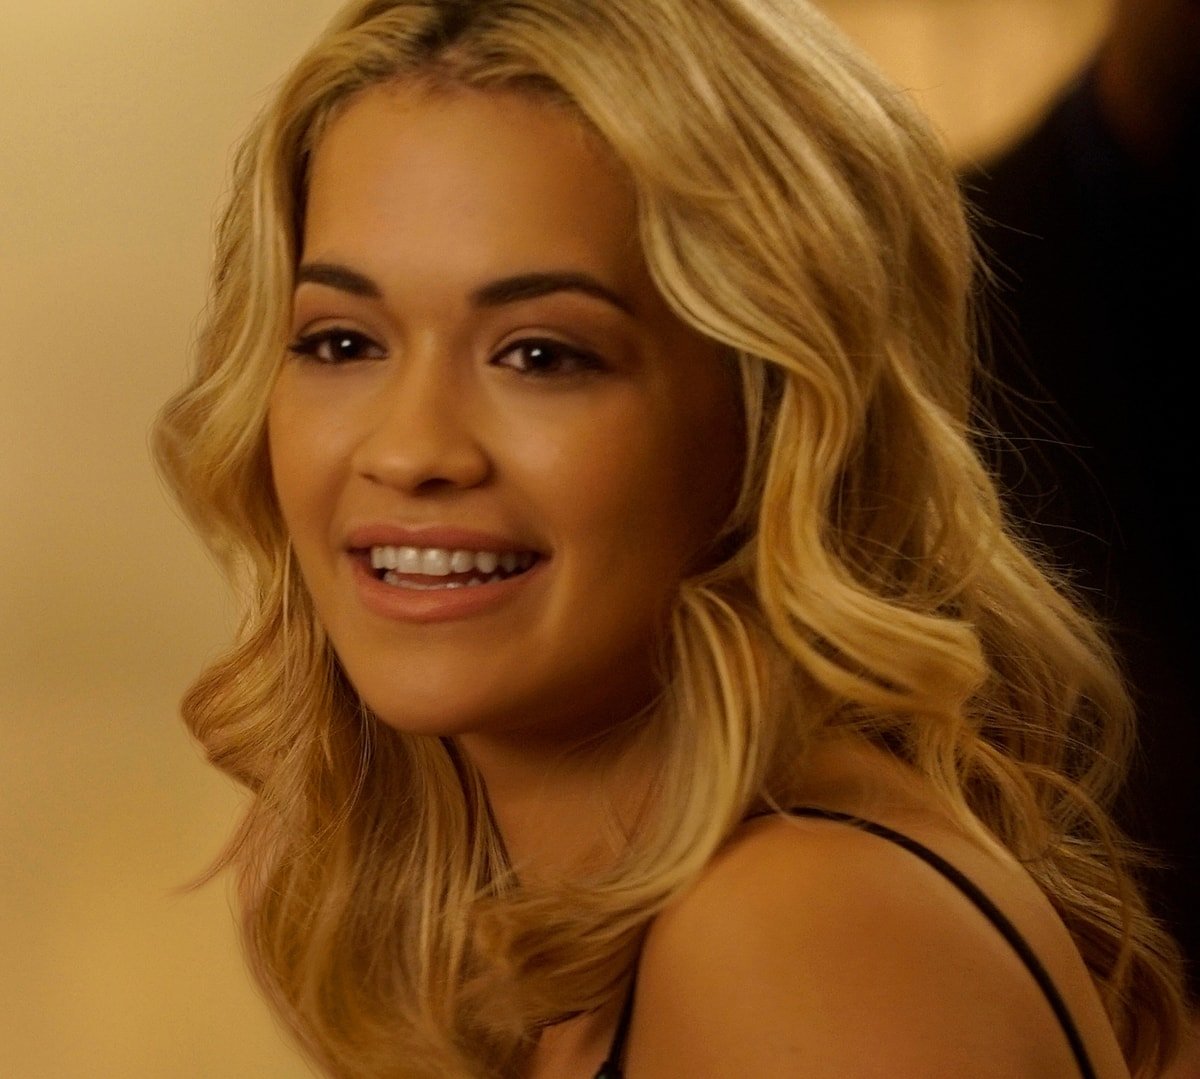 Rita Ora only had four lines as Christian Grey’s sister in Fifty Shades of Grey